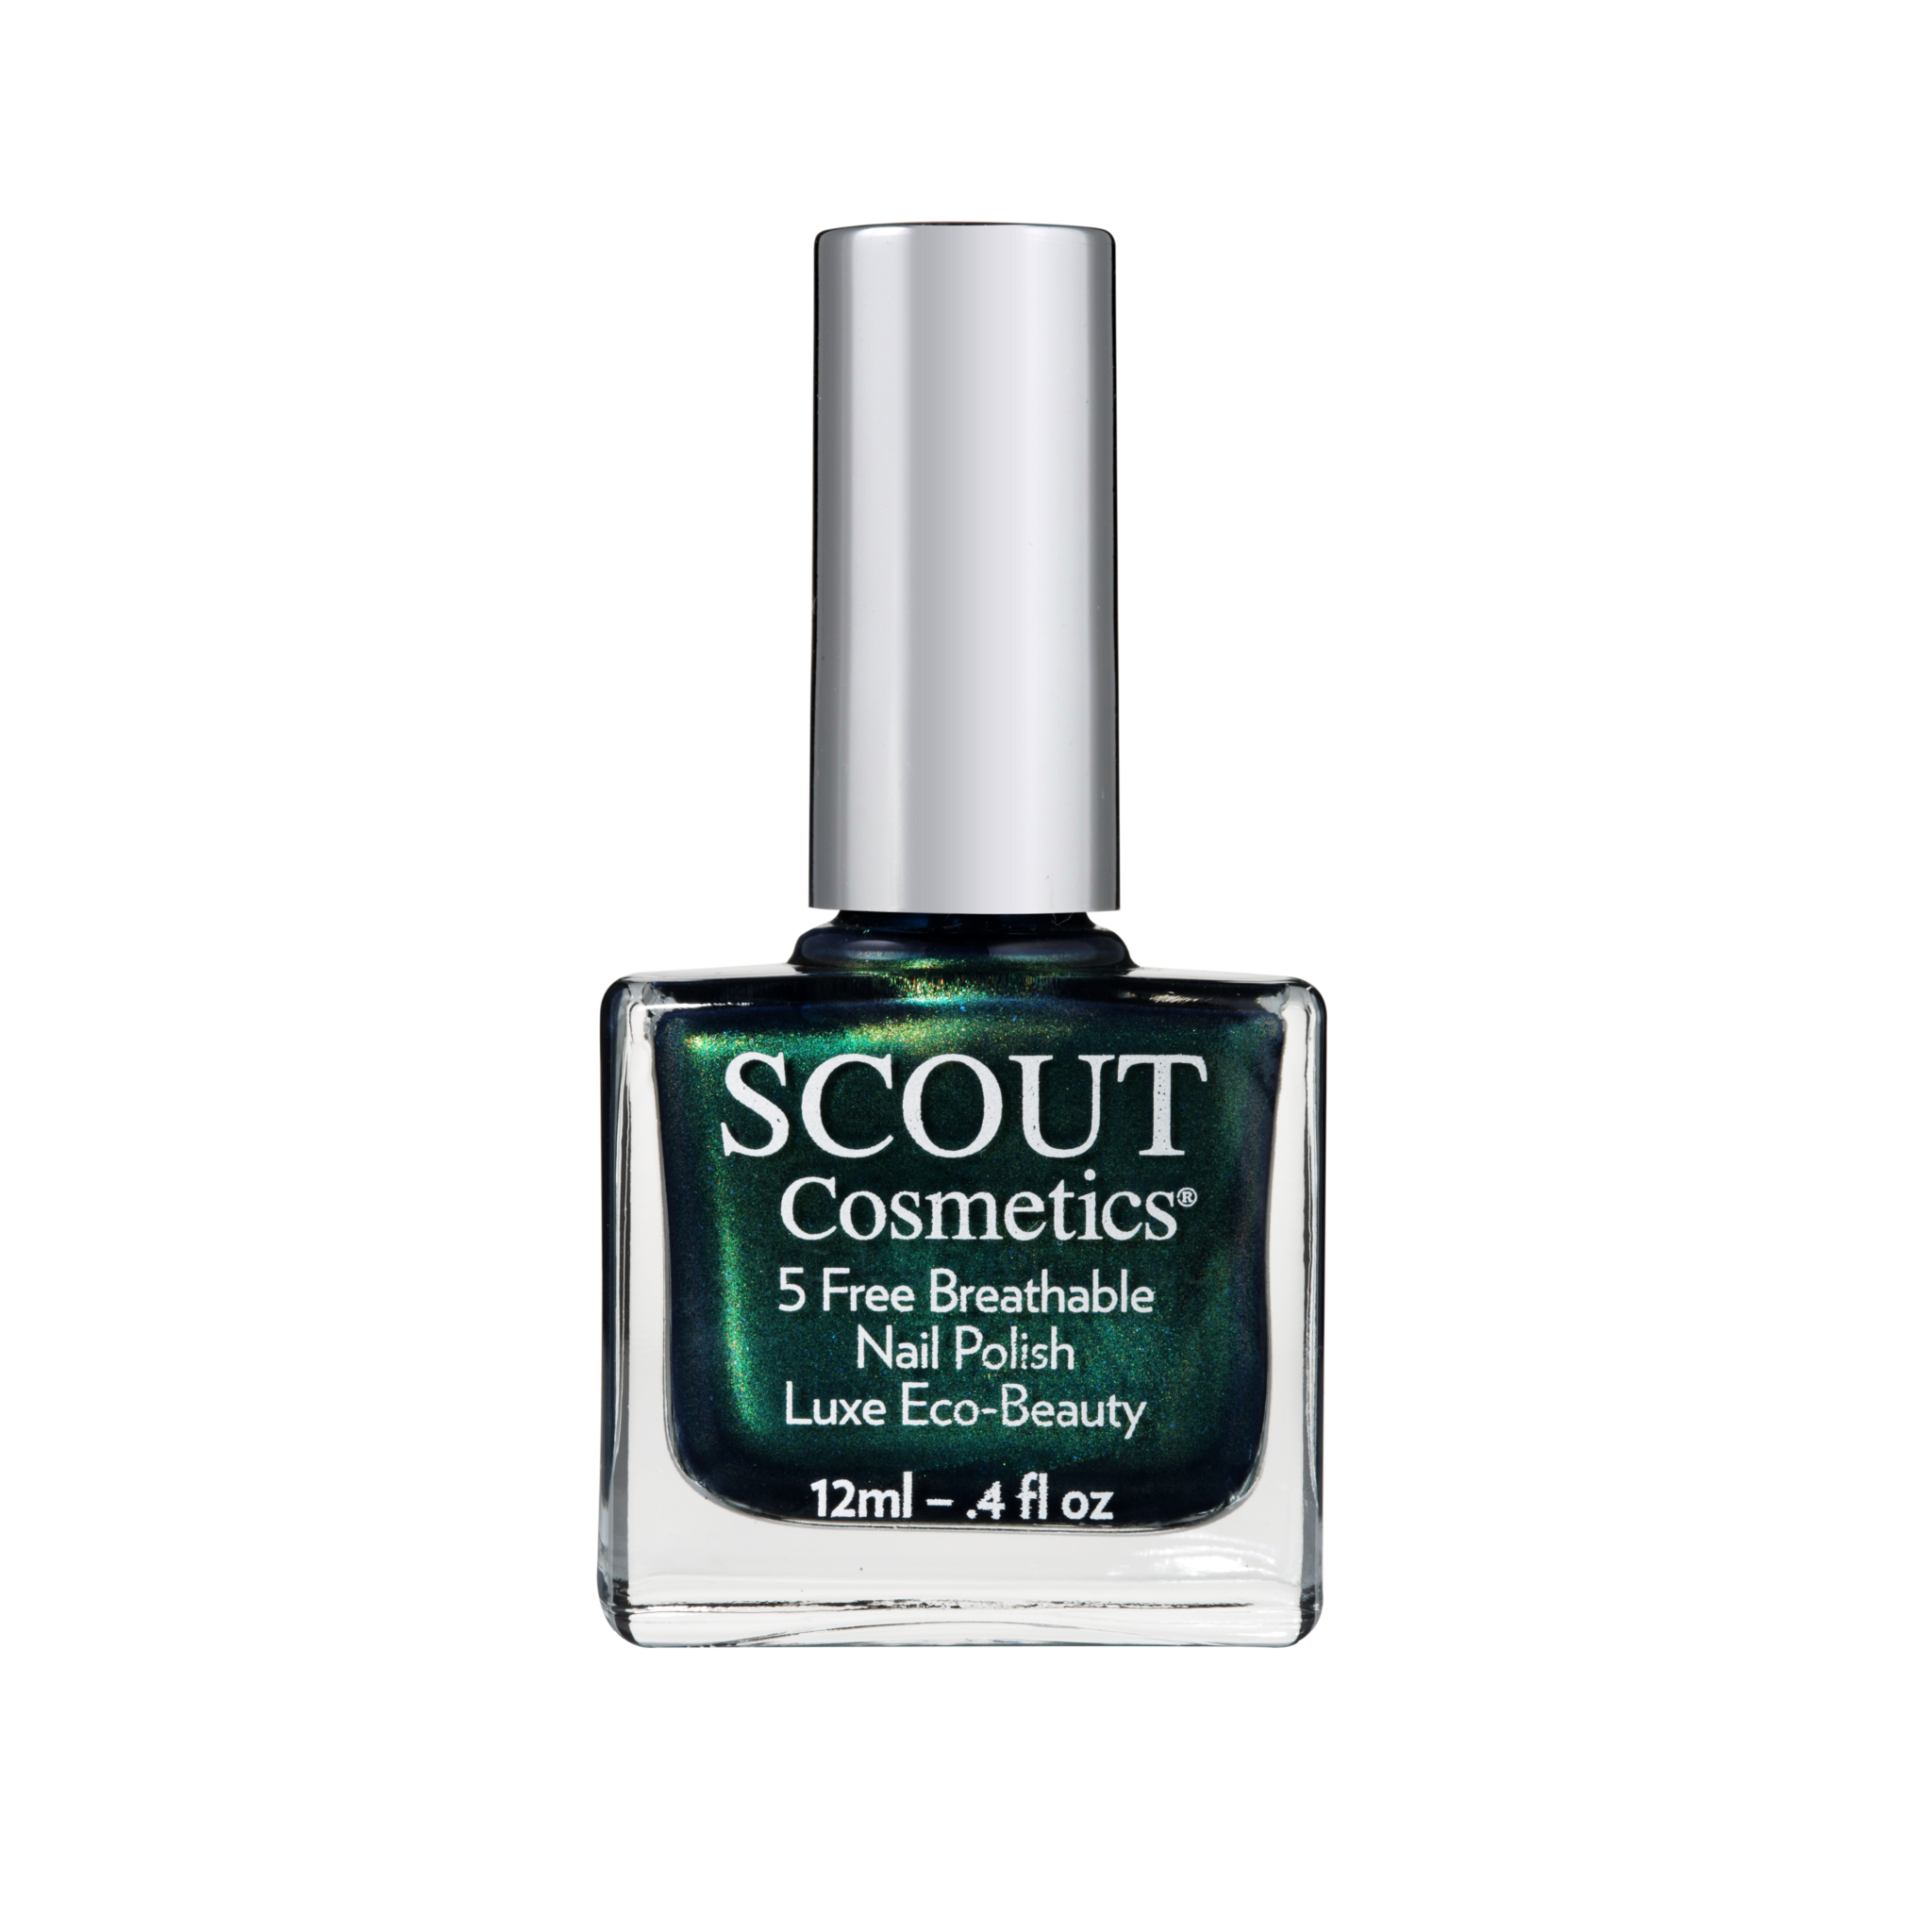 SCOUT Cosmetics Nail Polish - Losing My Religion